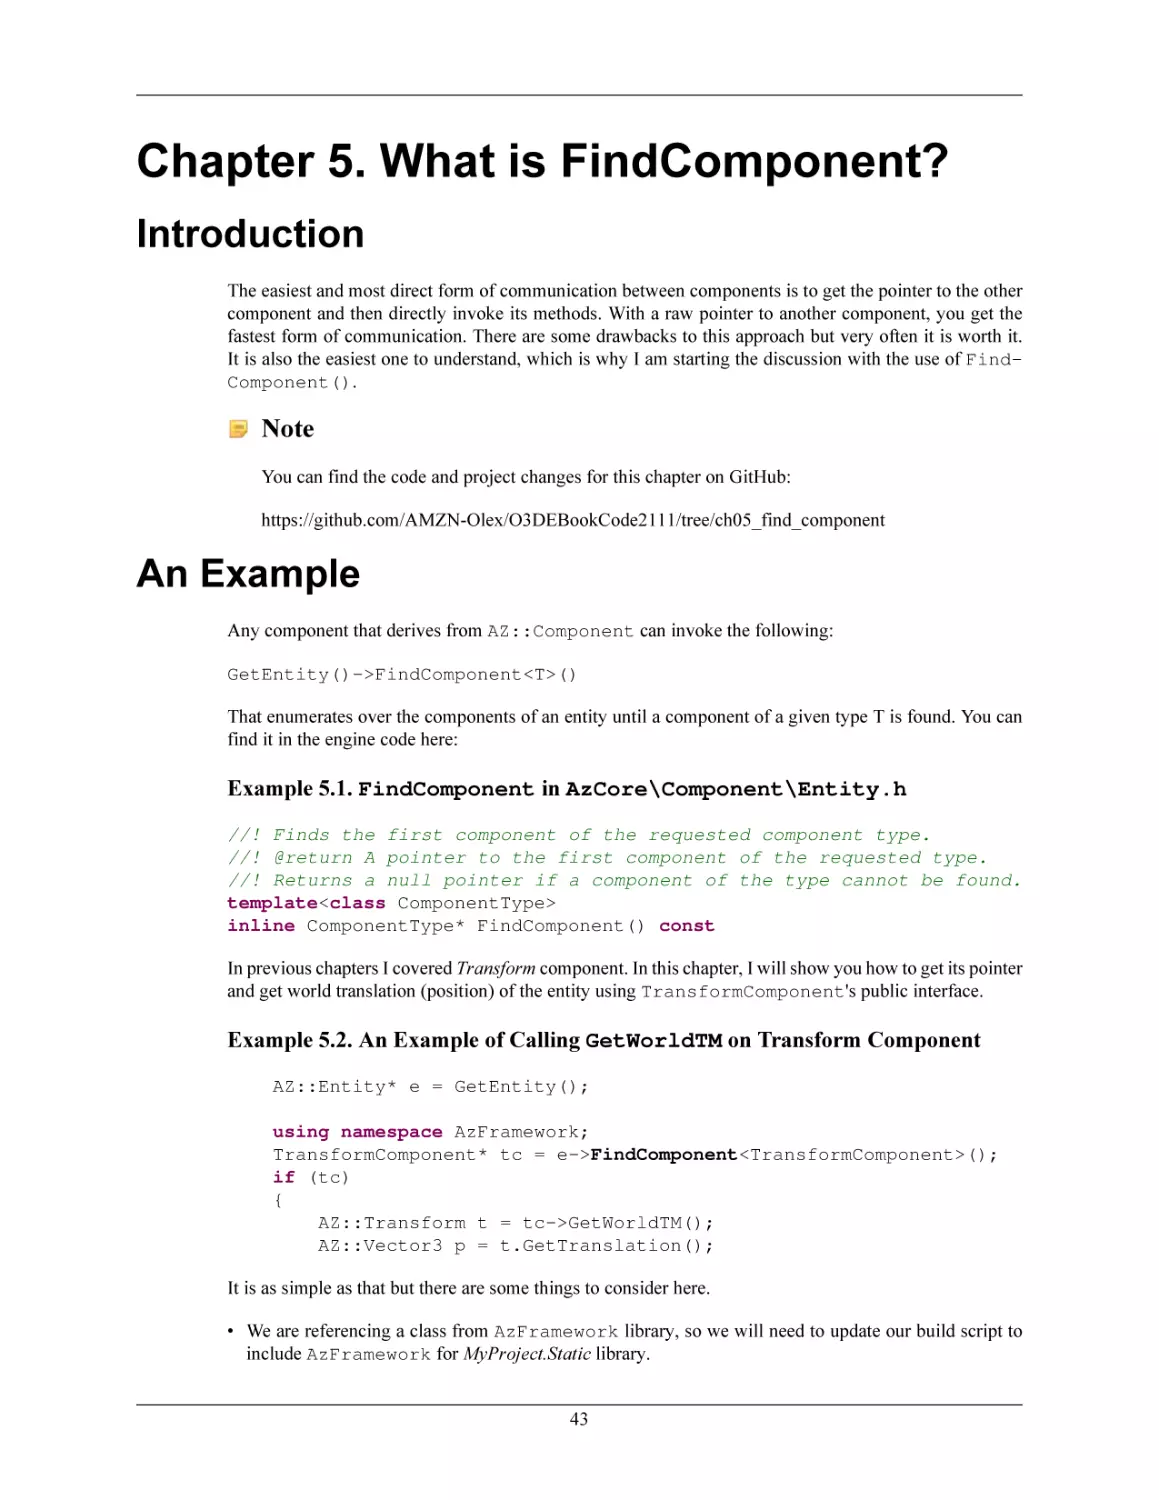 Chapter 5. What is FindComponent?
Introduction
An Example